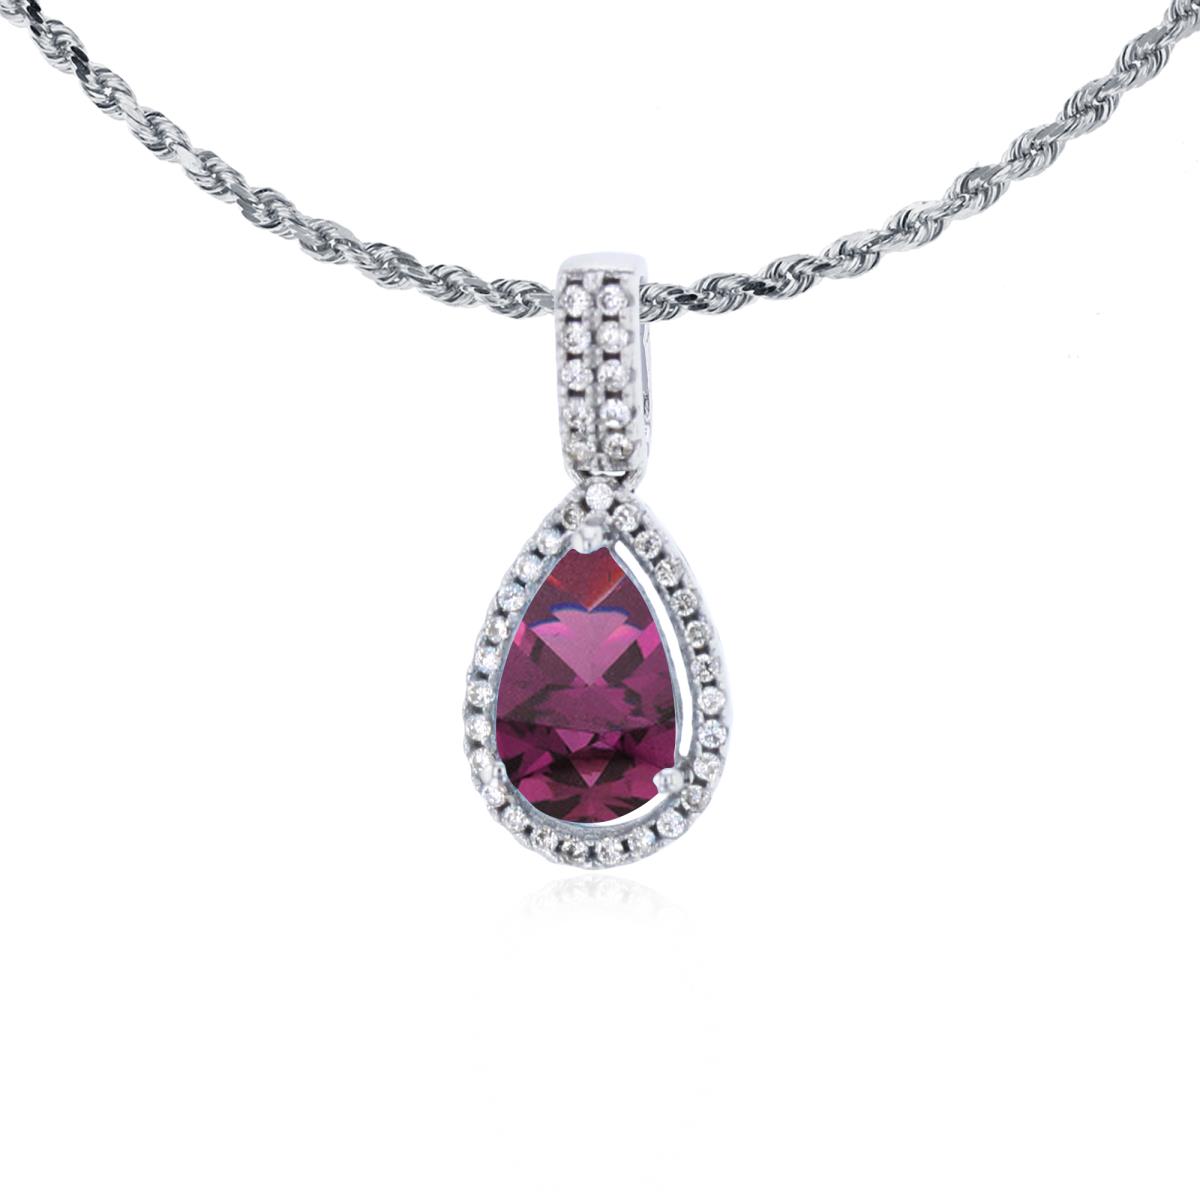 14K White Gold 8x5mm Pear Cut Rhodolite & 0.11 CTTW Diamond Halo 18" Rope Chain Necklace